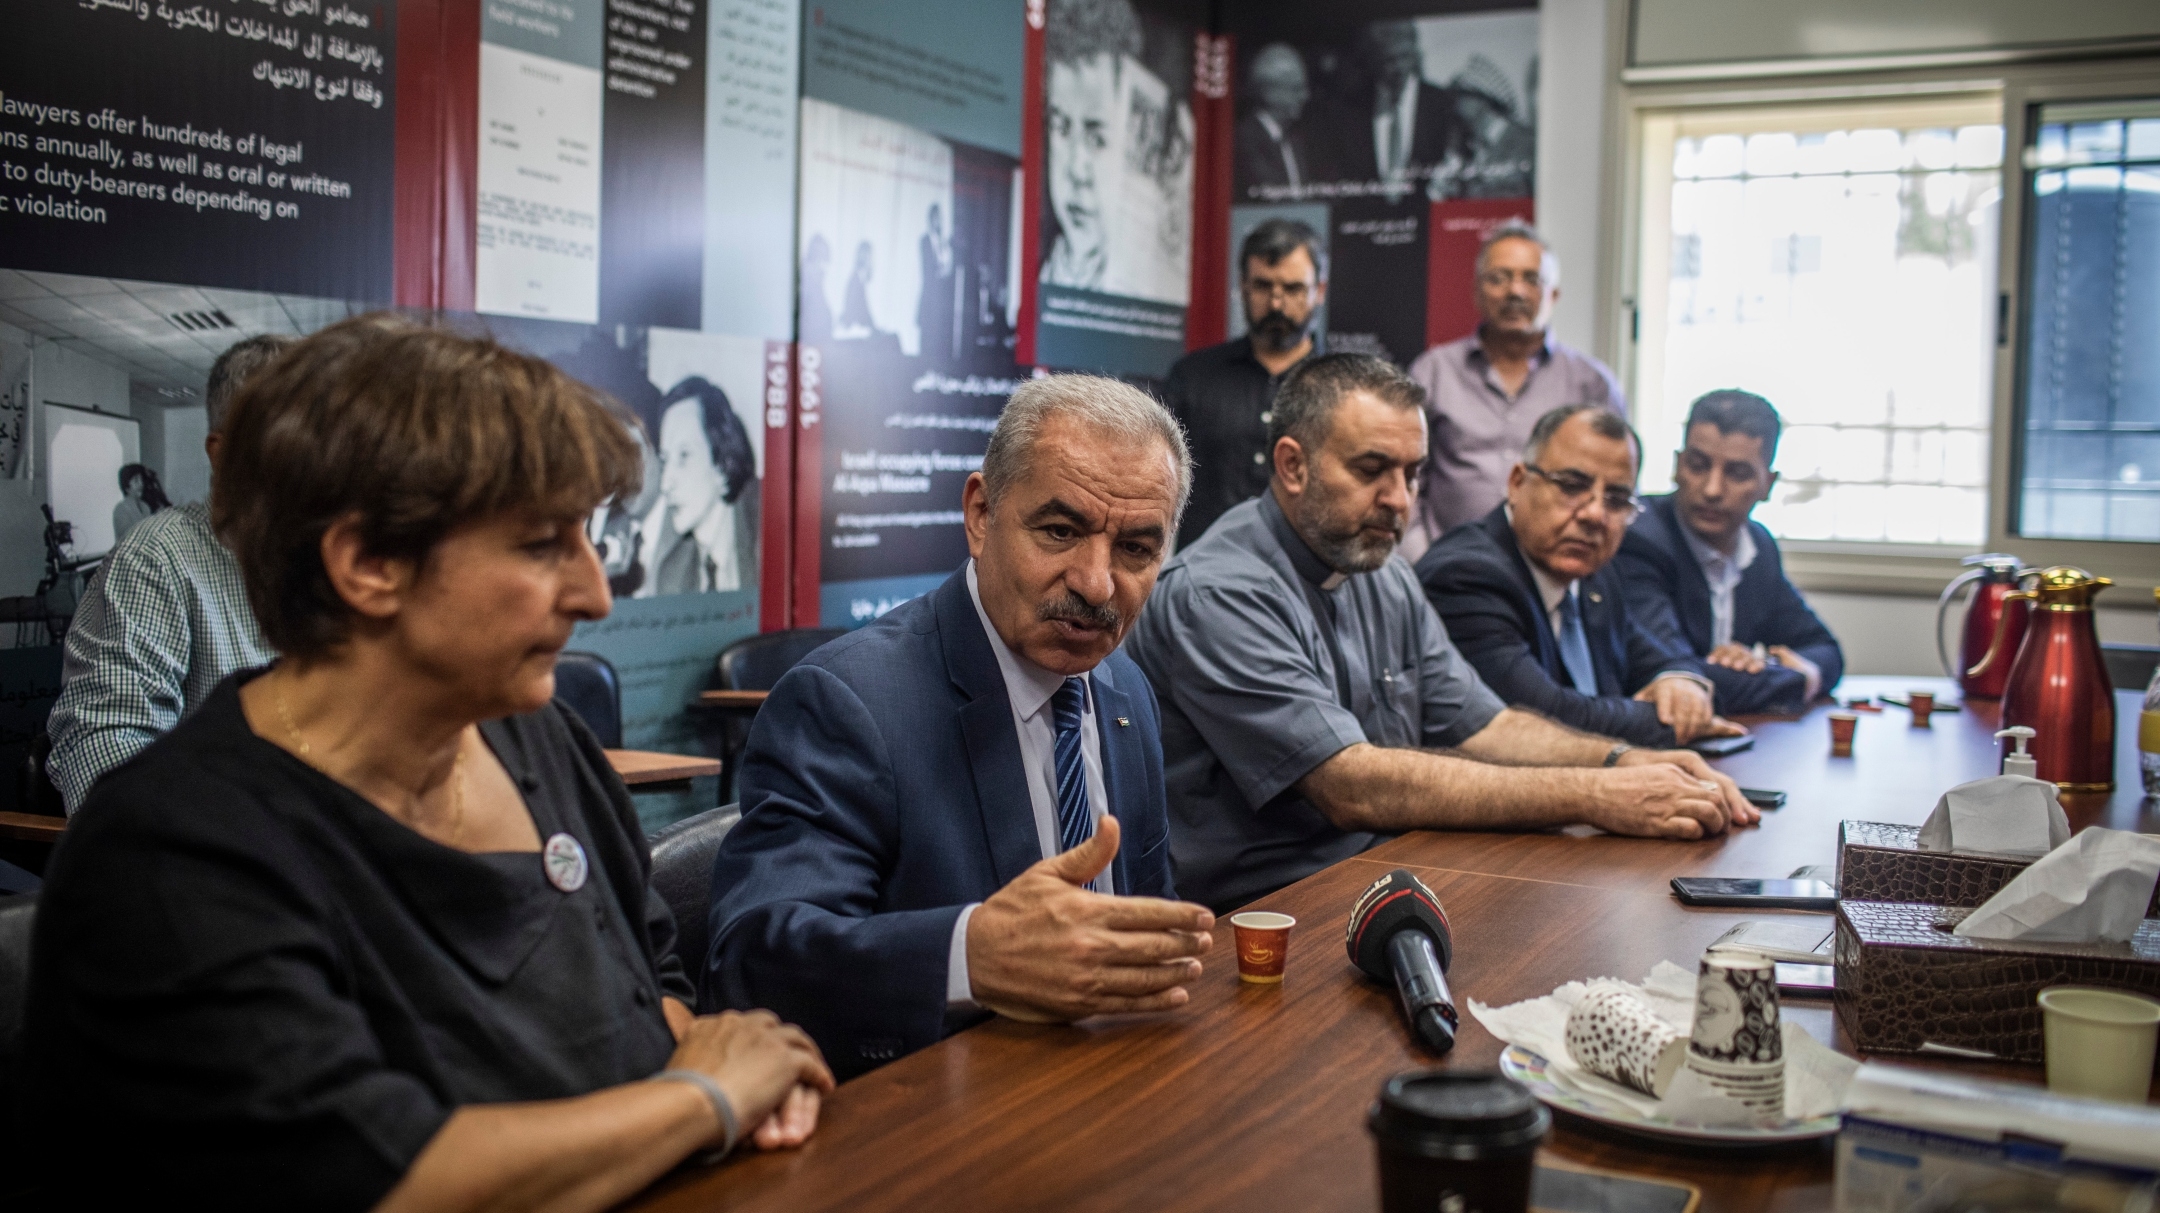 Palestinian Prime Minister Mohammad Shtayyeh gives a press statement at al-Haq Human Rights Organization, which was raided and shut down by Israeli military forces in Ramallah, West Bank, Aug. 18 2022. (Ilia Yefimovich/picture alliance via Getty Images)